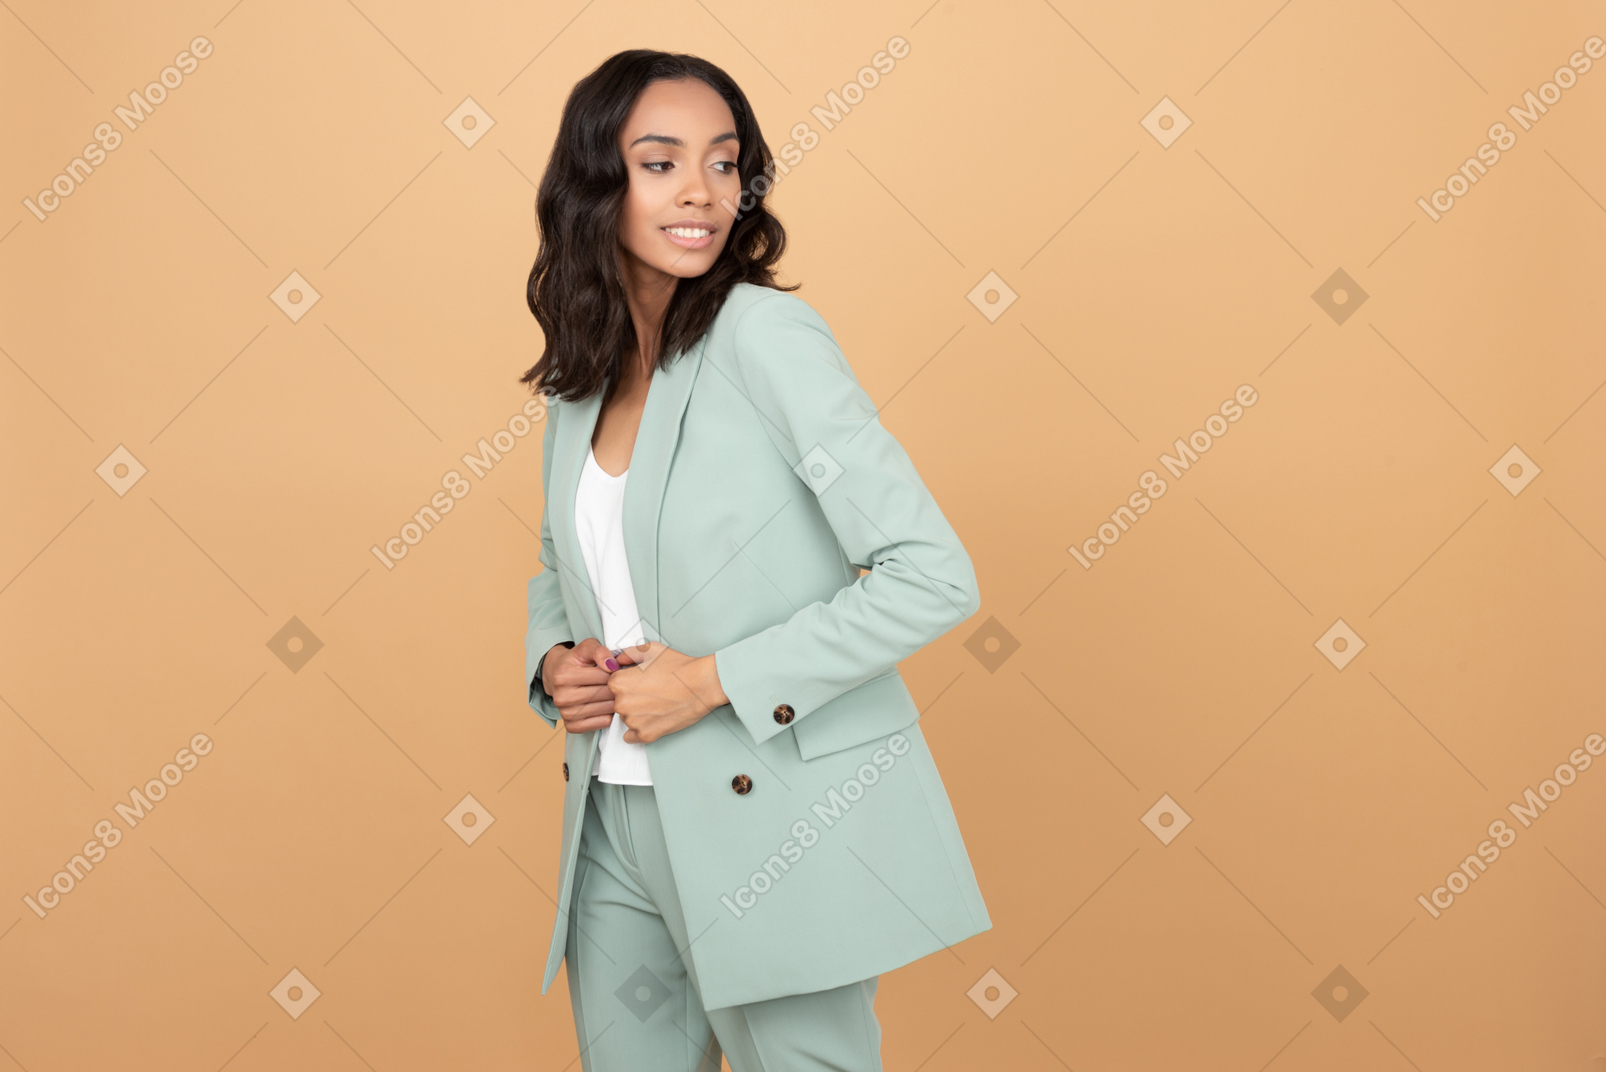 Attractive young woman holding her hands on her jacket an looking aside